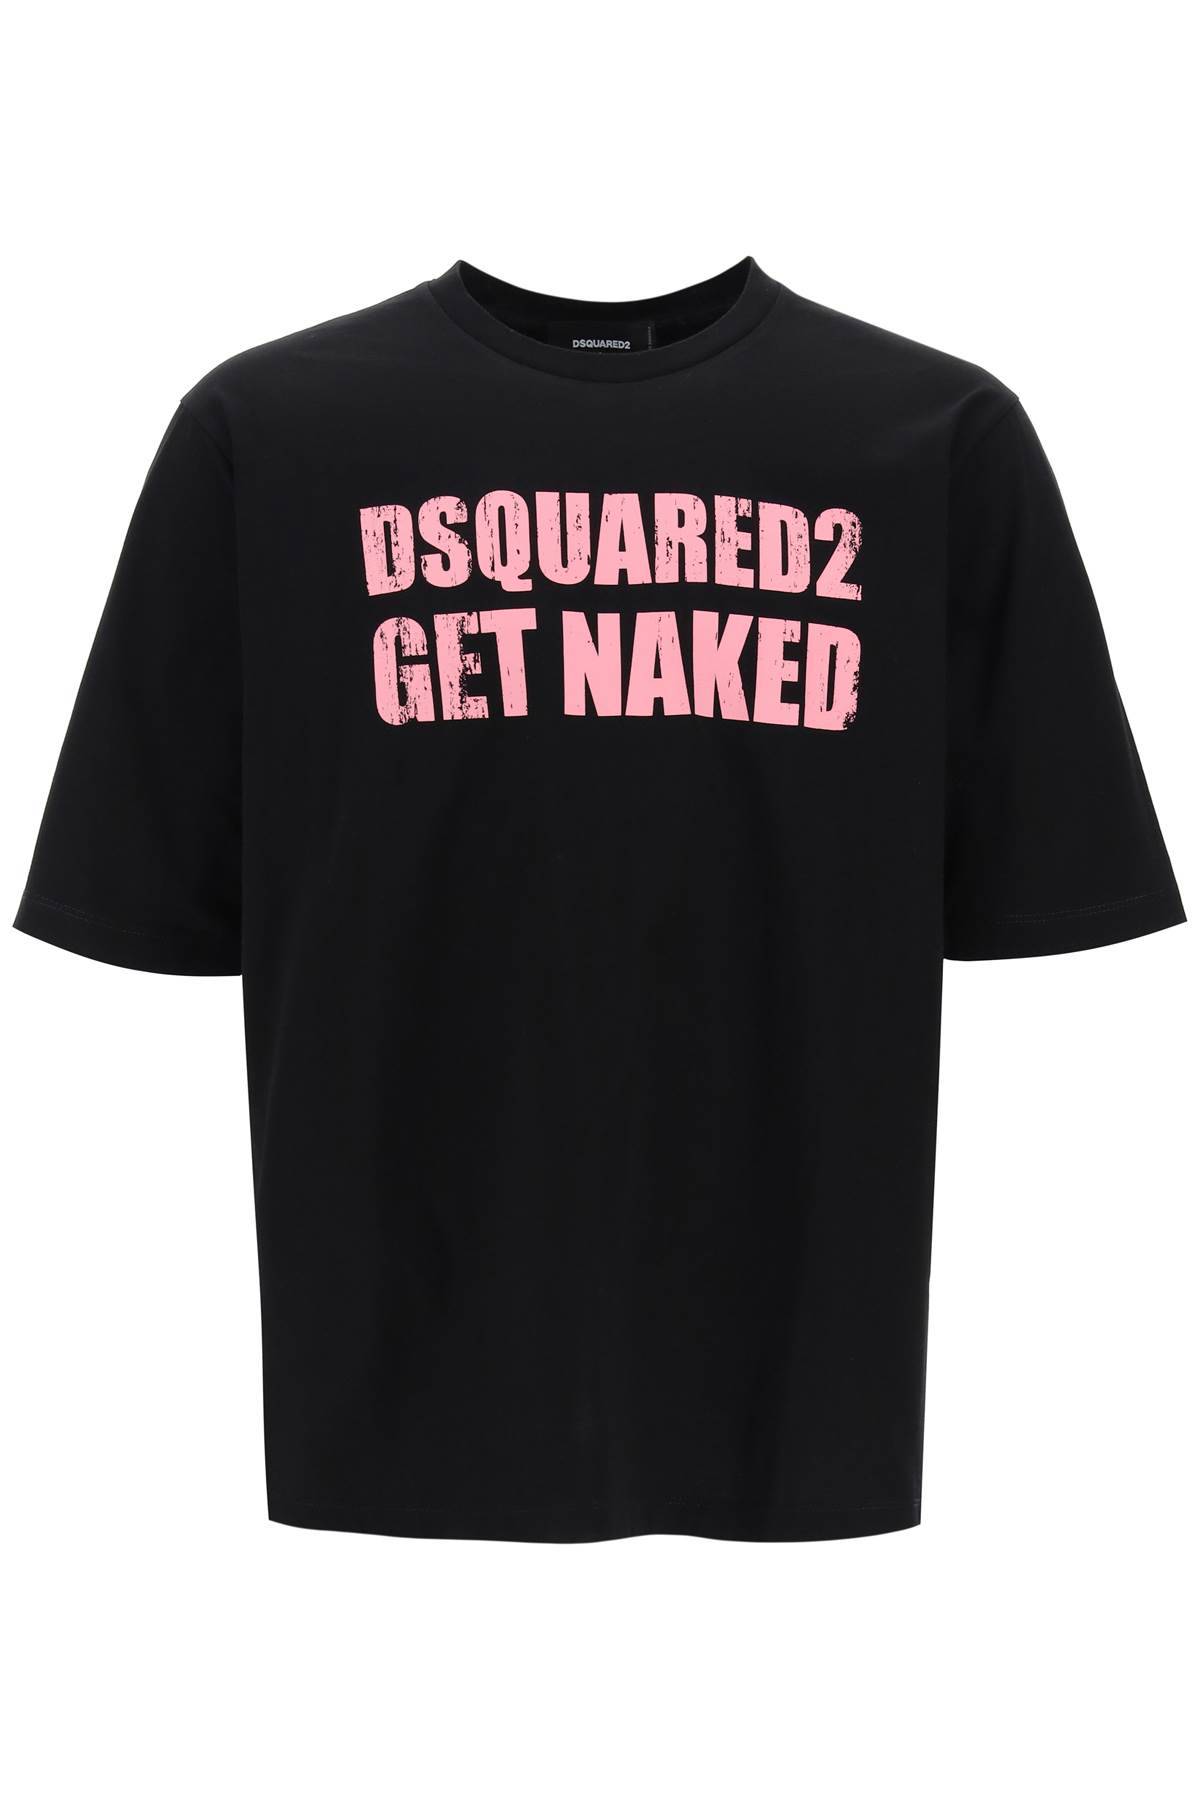 Dsquared2 DSQUARED2 skater fit printed t-shirt